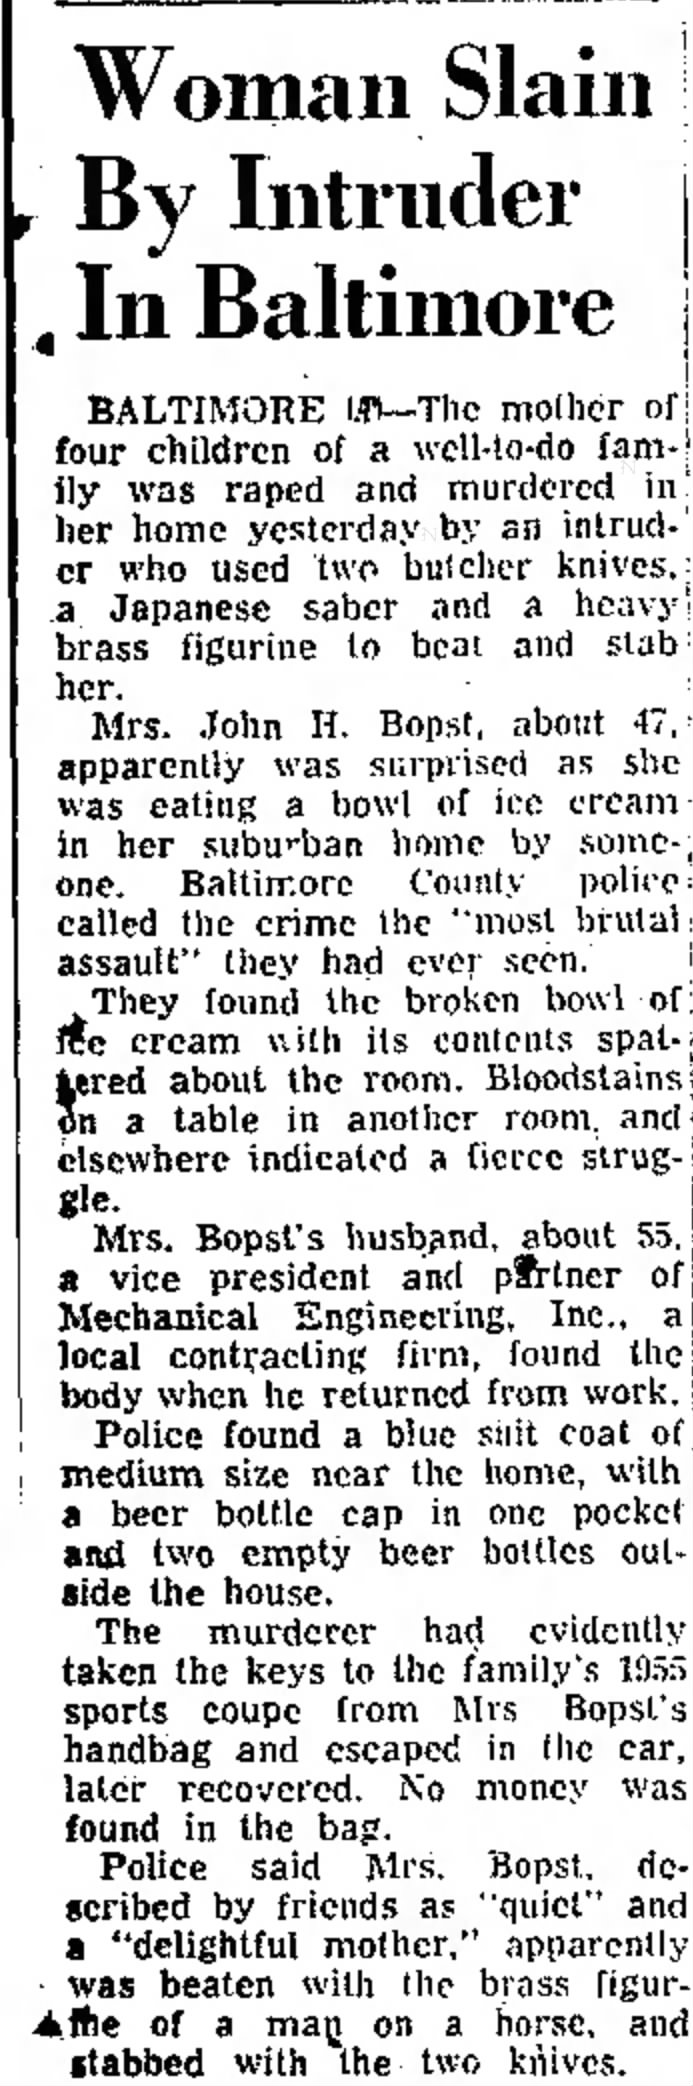 Mrs. John H. Bopst Murder in NC Paper (The Daily Times-News (Burlington, NC), June 13 1956, page 5